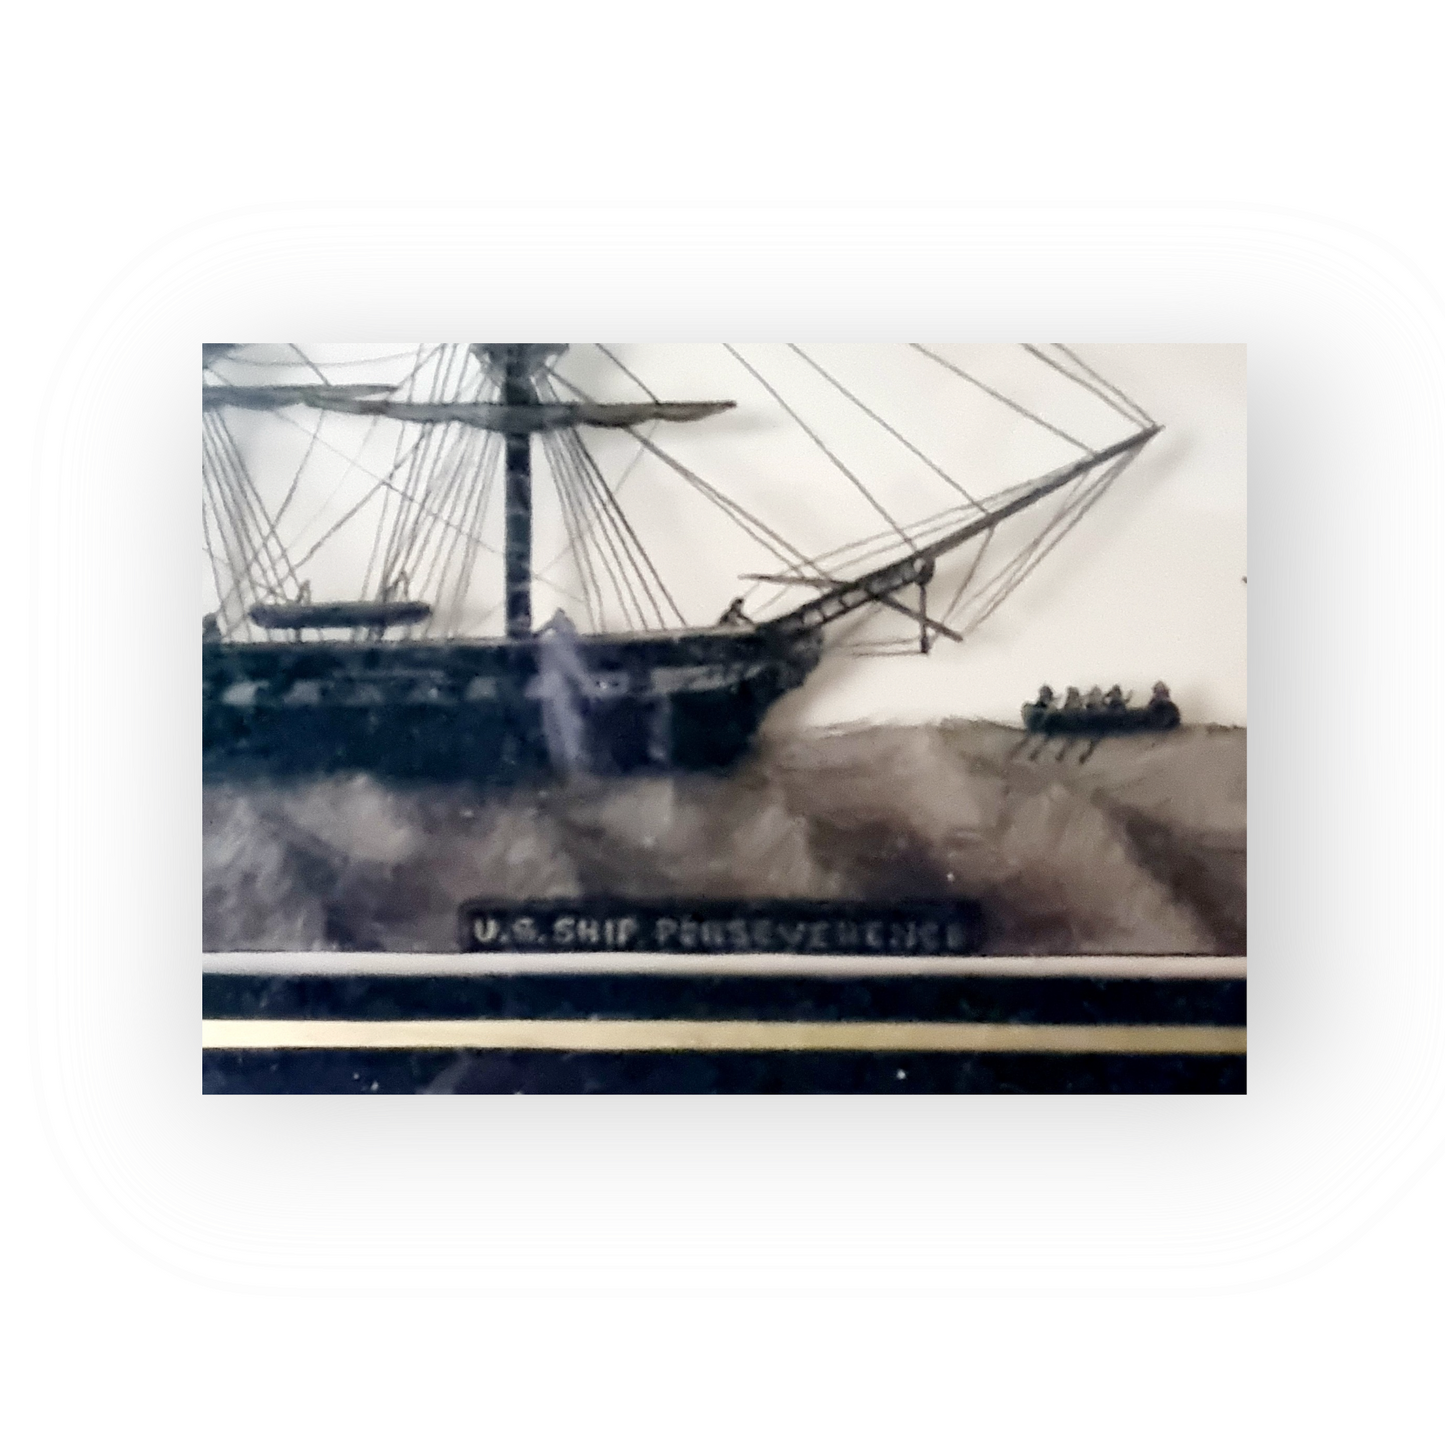 A Fine Pair of Late 18th Century American Nautical Antique Reverse Paint on Glass Silhouette Pictures of US "Perseverence" & USS "Constitution", circa 1797